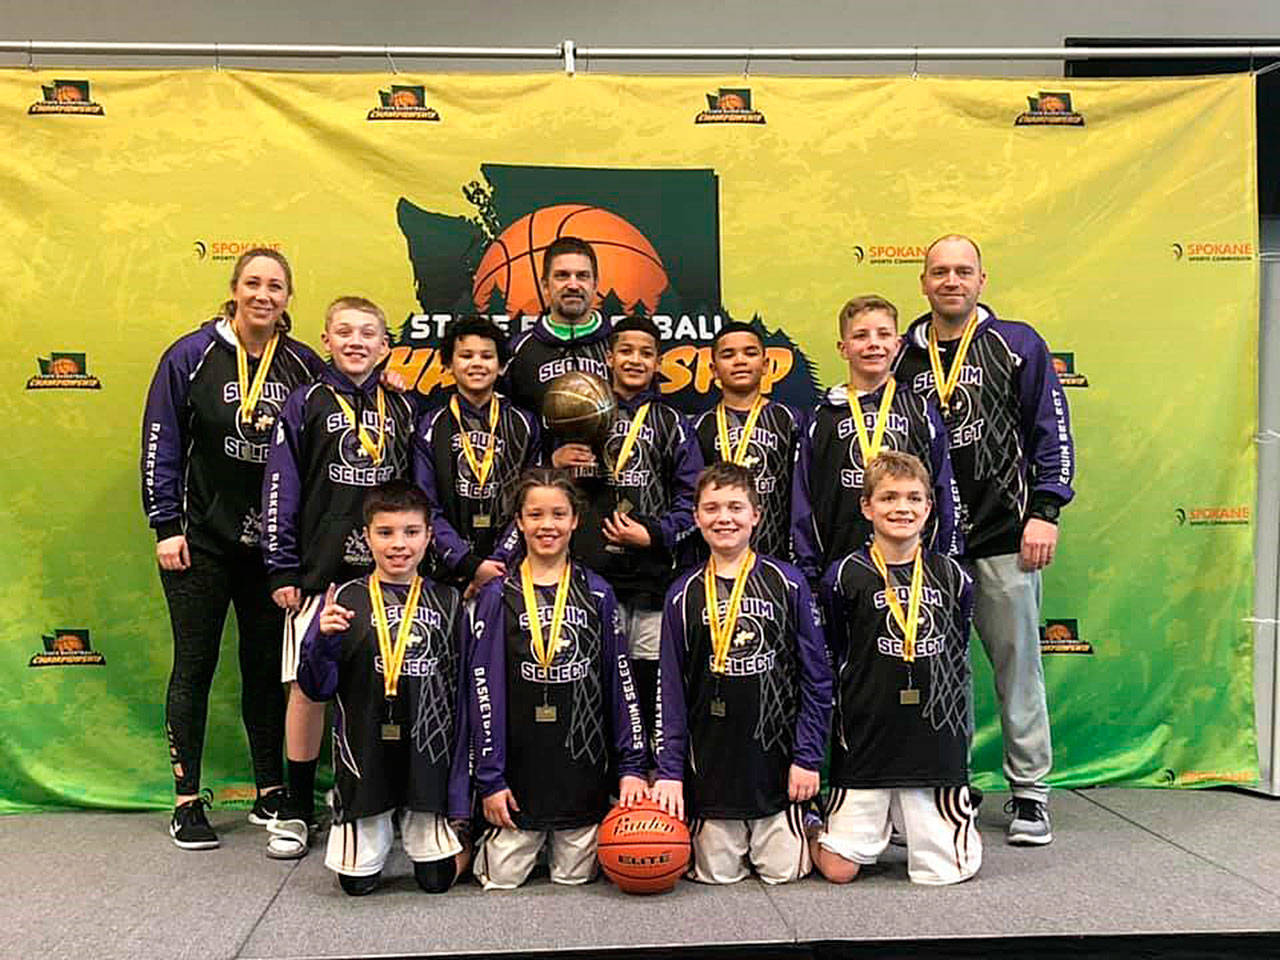 Sequim’s fifth grade select AAU boys basketball team members include (back row, from left) head coach Nikki Julmist, Devyn Dearinger, Legend Liggins, assistant coach Gary Abrams, Solomon Sheppard, Jericho Julmist, Hunter Tennell and assistant coach Brent Schmadeke, with (front row, from left) Adrian Aragon, Alijah Brown, Clay Abrams and Zeke Schmadeke. Not pictured is Lincoln Bear. Submitted photo